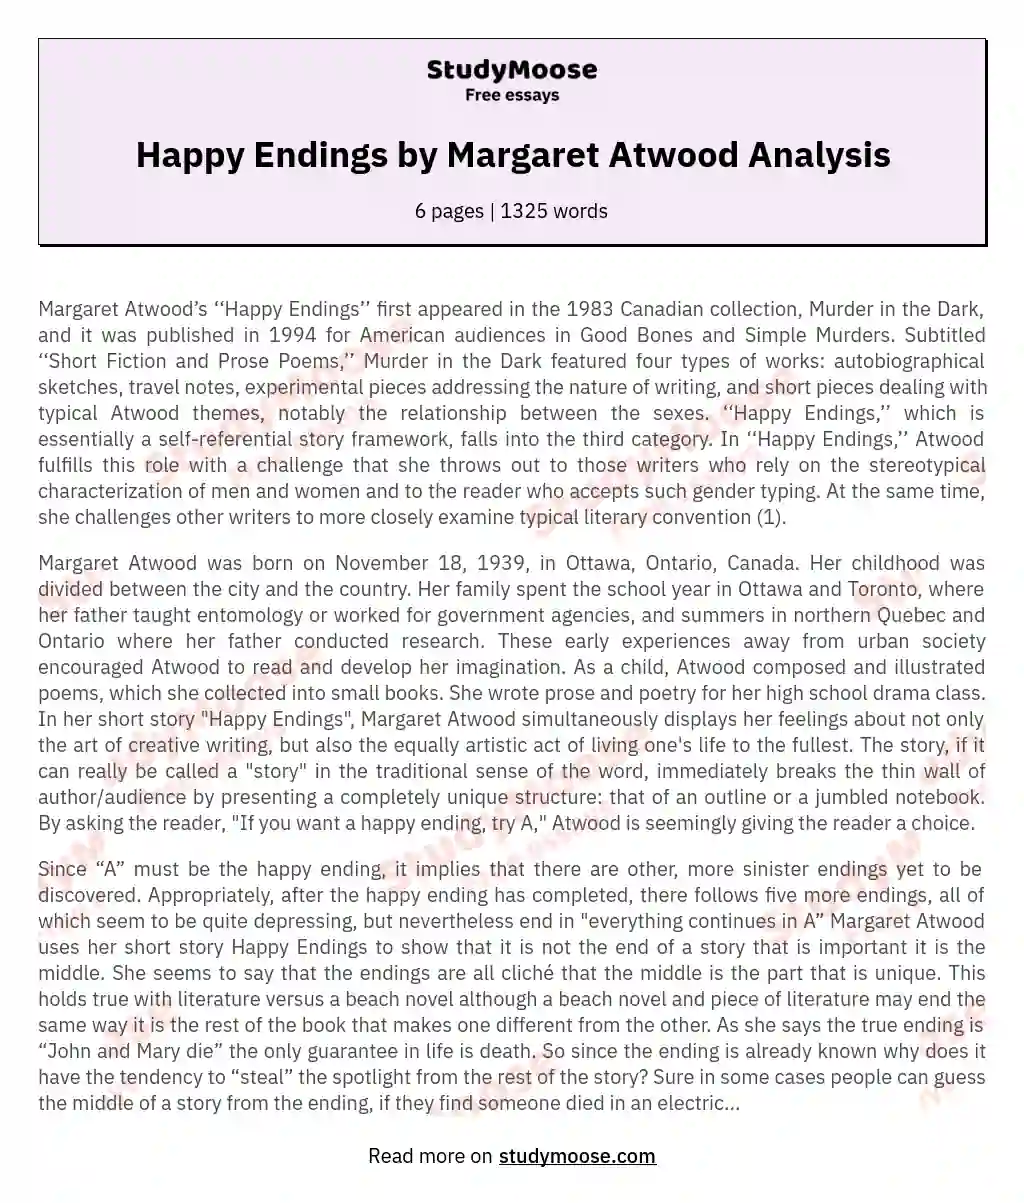 Happy Endings by Margaret Atwood Analysis essay